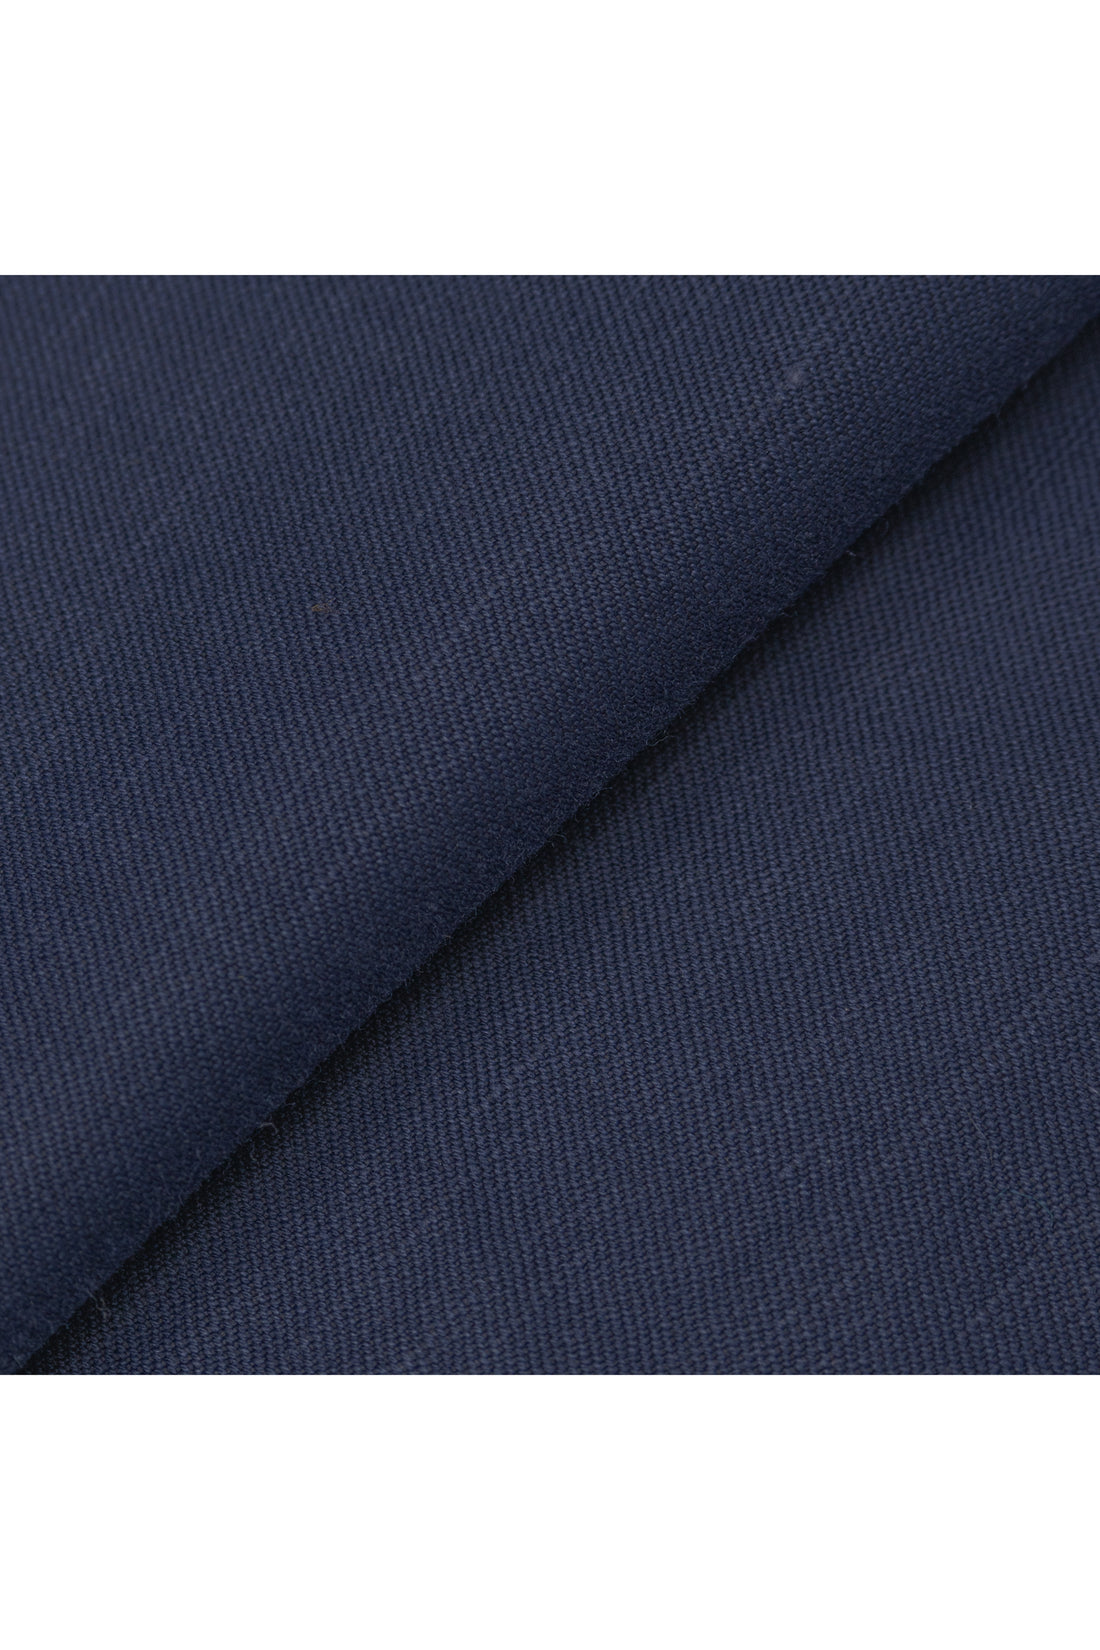 Navy Cotton and Linen Trousers